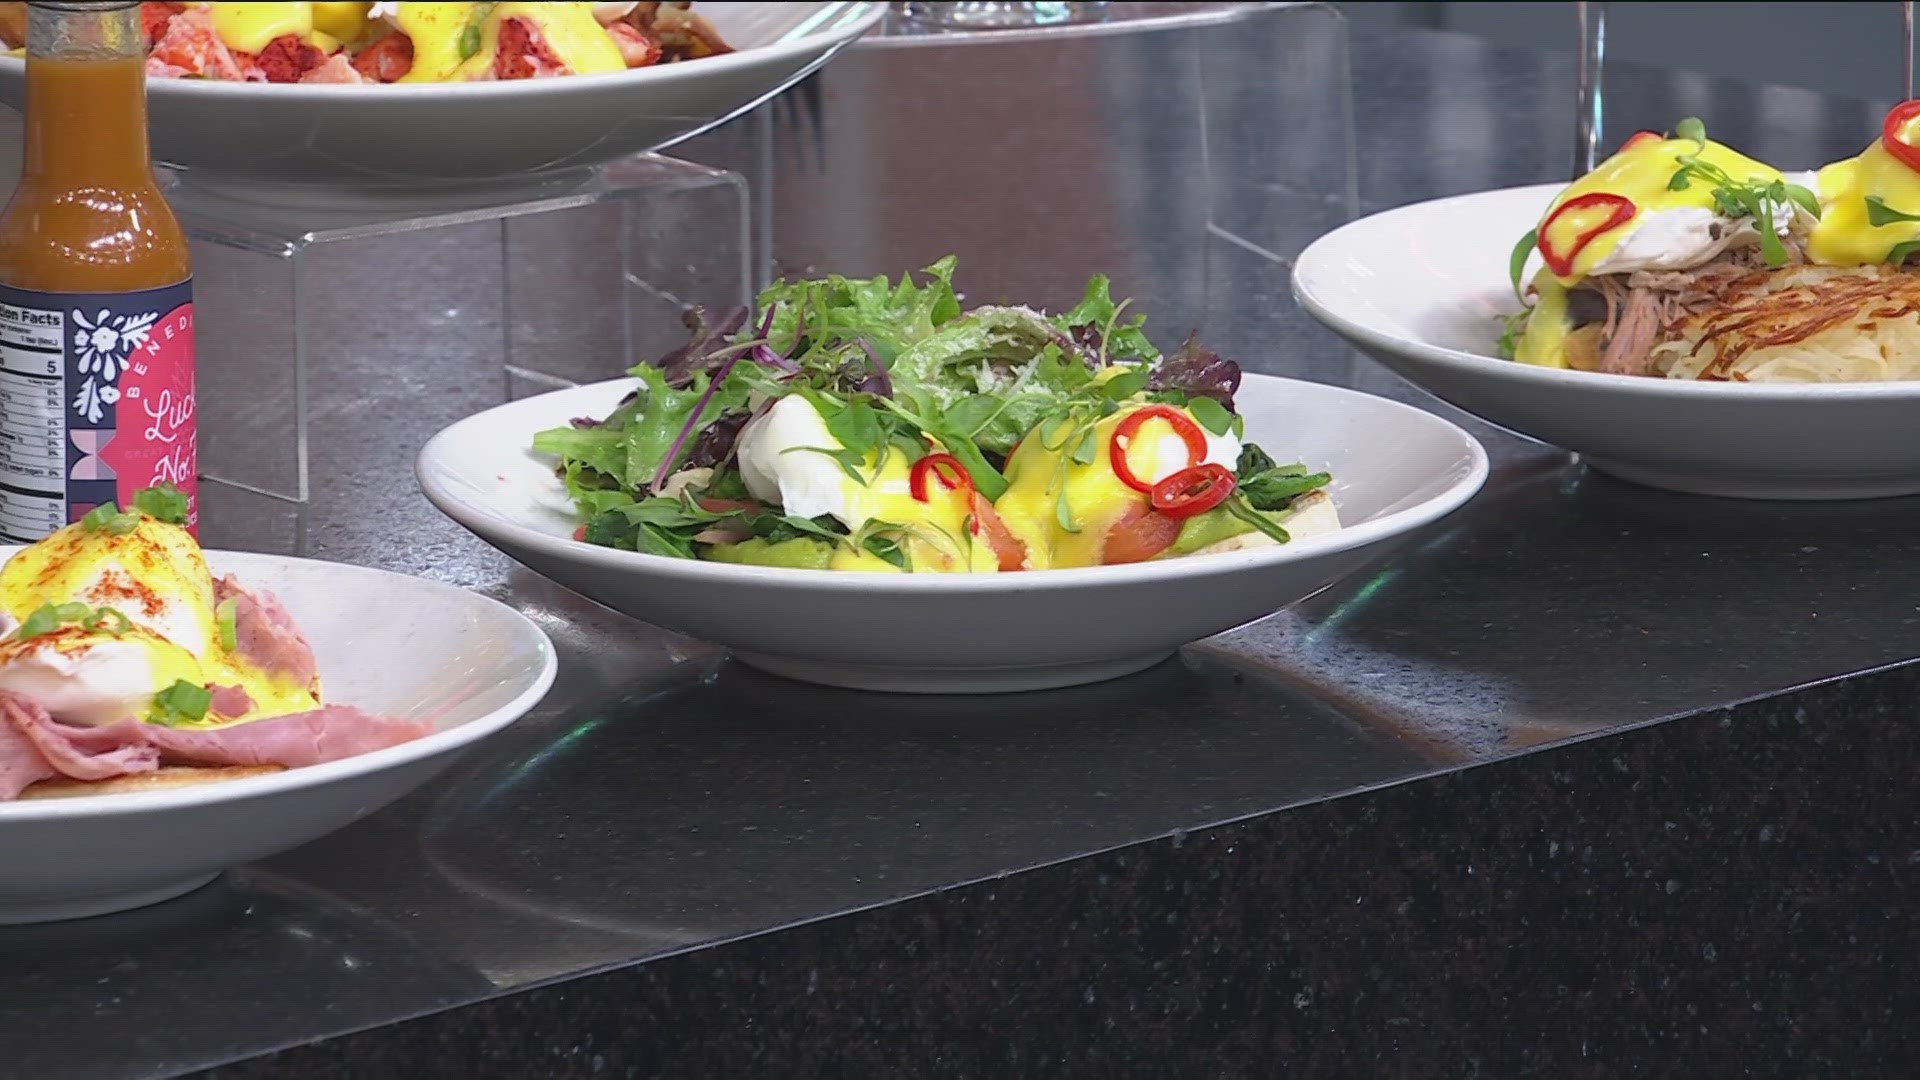 Benedict's Executive Chef Mike Rakun joined KARE 11 Saturday to cook up a popular breakfast dish from his restaurant in Wayzata.